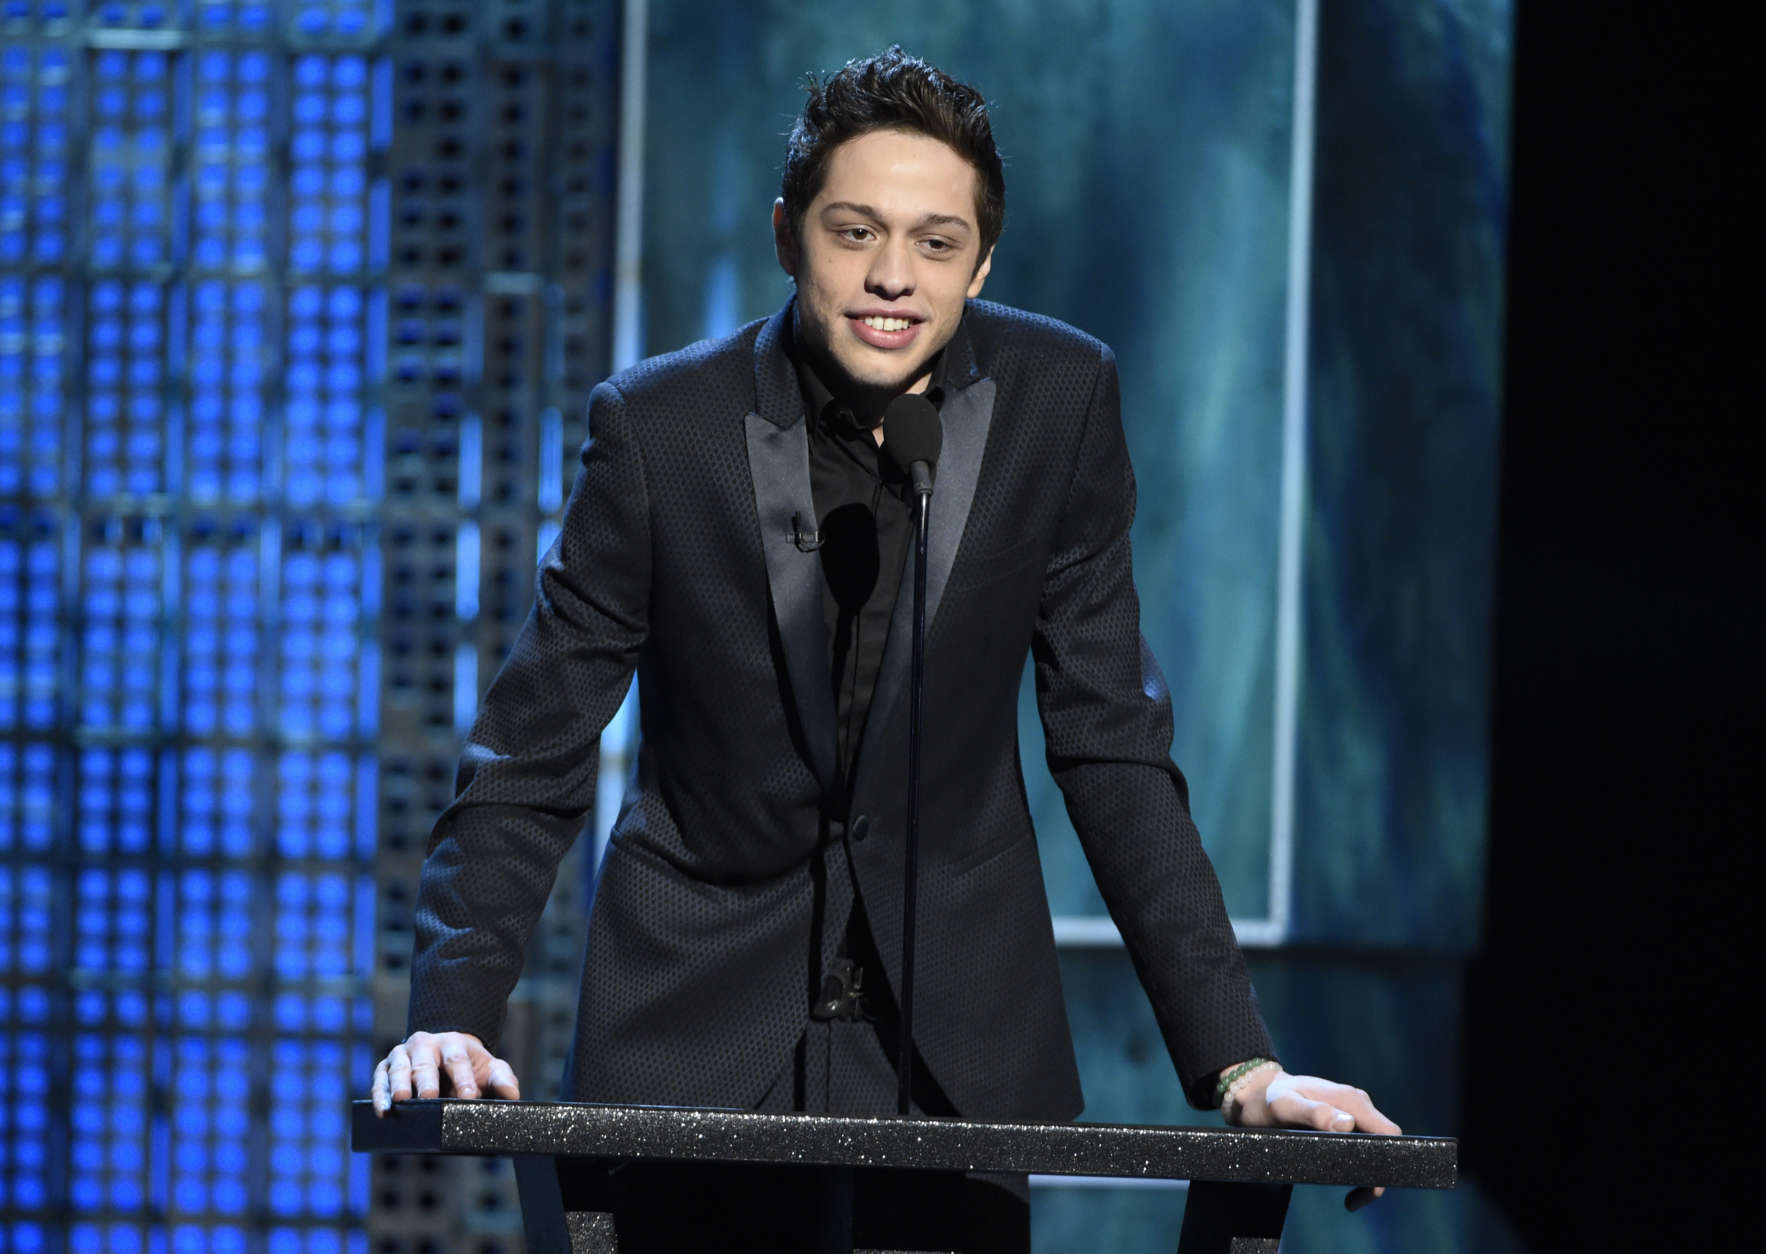 FILE - In this March 14, 2015, file photo, Pete Davidson speaks at a Comedy Central Roast at Sony Pictures Studios in Culver City, Calif. The "Saturday Night Live" cast member said on Instagram Monday, March 6, 2017, that he  has quit drugs and is “happy and sober for the first time in 8 years.” (Photo by Chris Pizzello/Invision/AP, File)